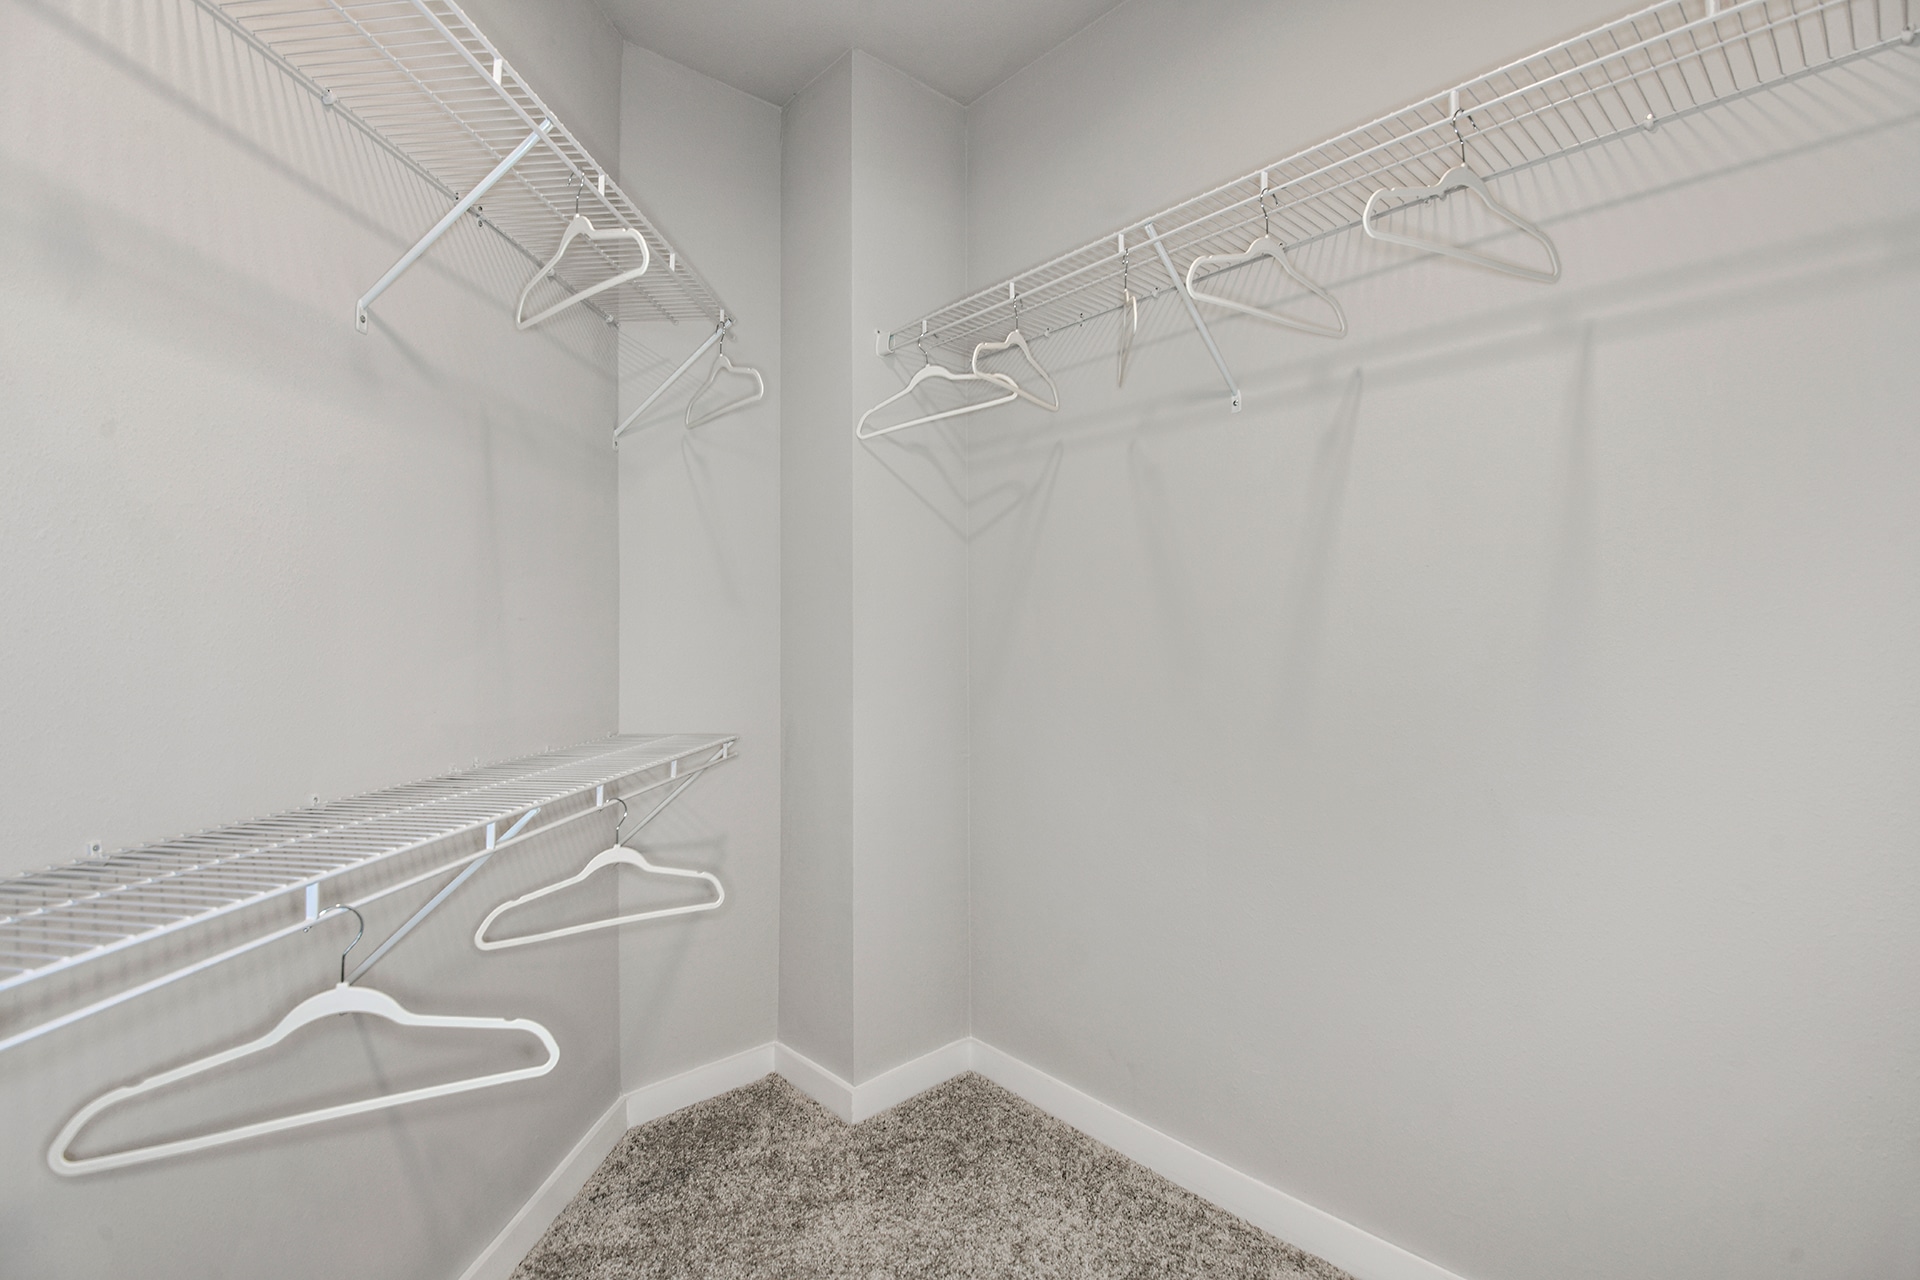 A walk in closet with clothes hanging on the racks.